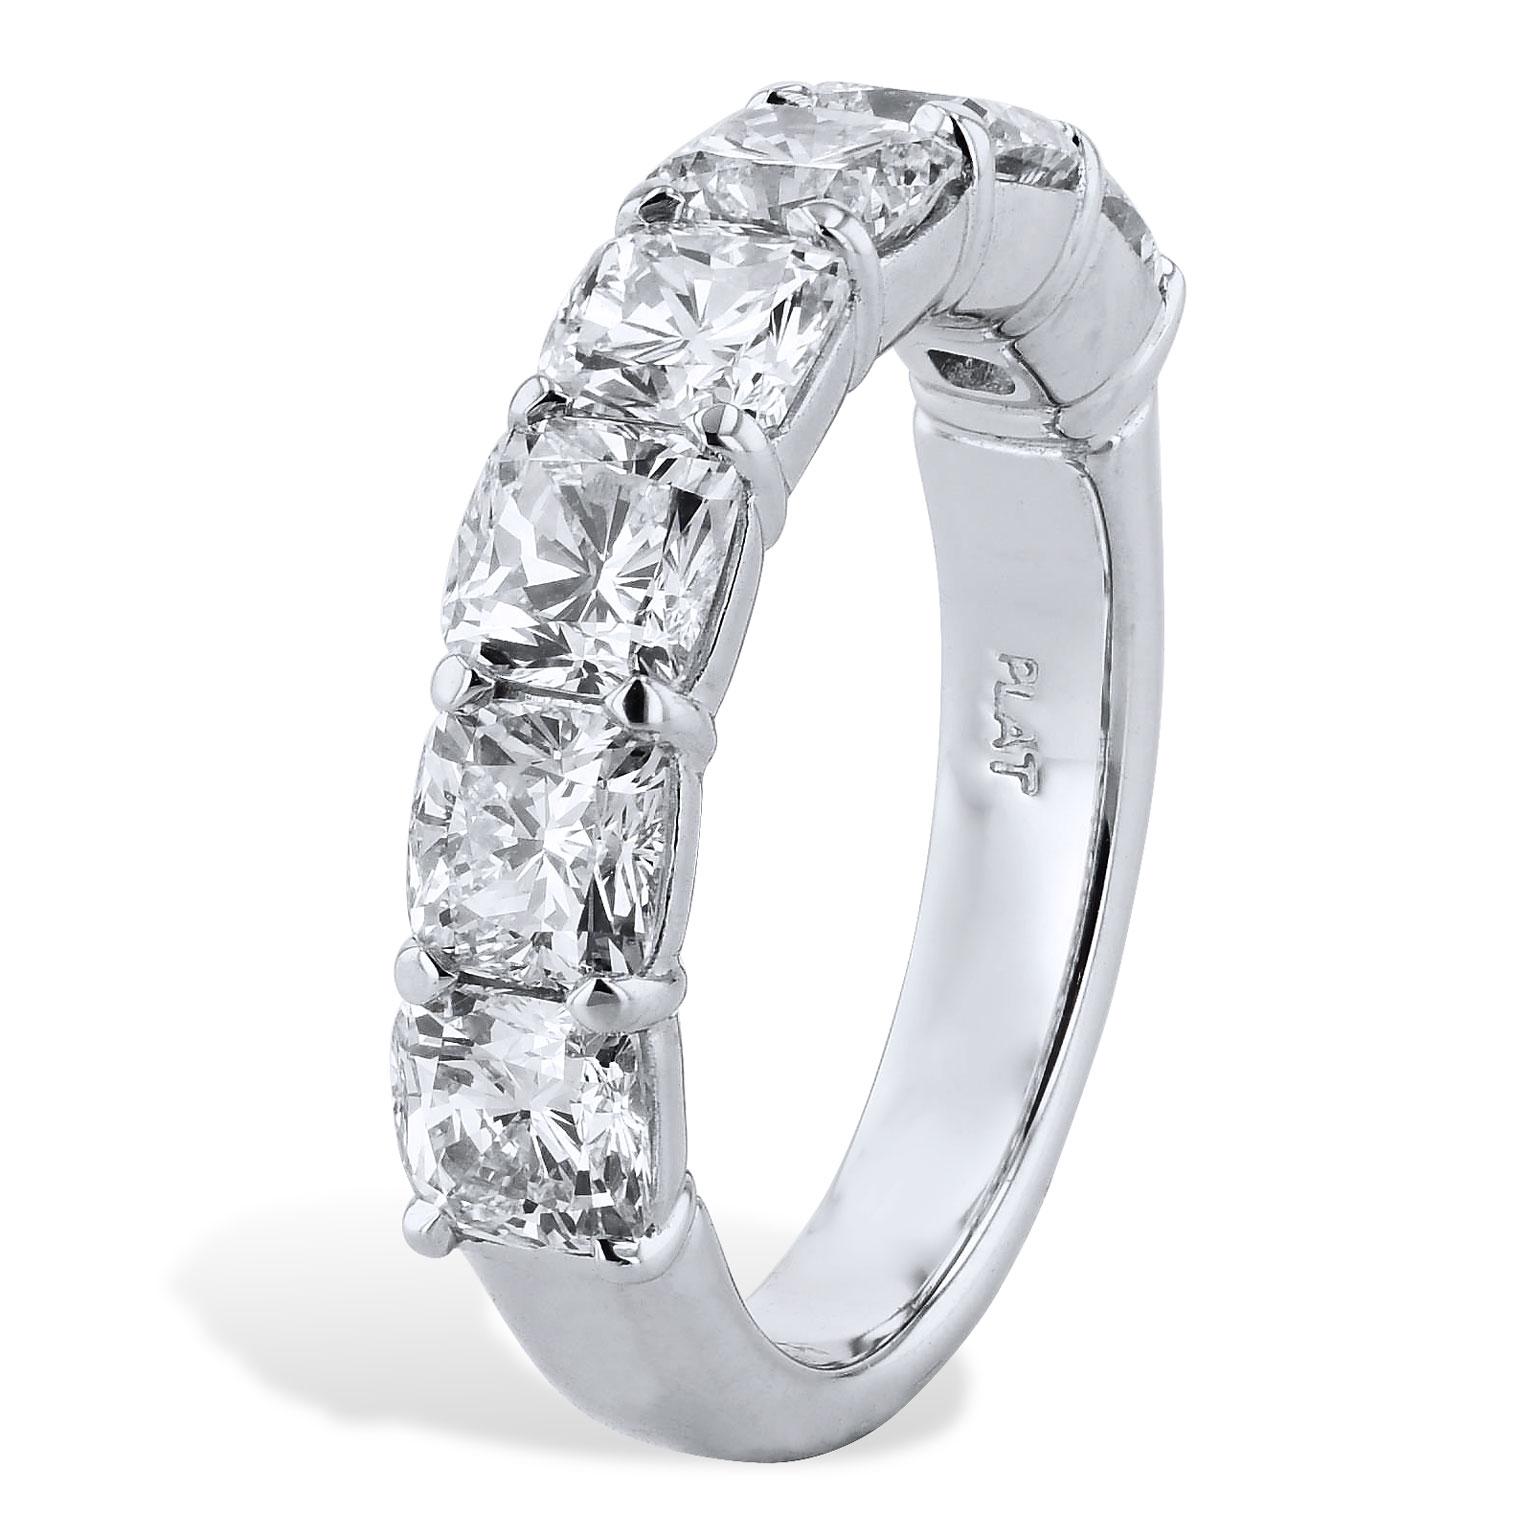 3.50 Carat Seven Stone Cushion Cut Diamond Platinum Eternity Band 

Seven cushion cut diamonds (H/VS2), with a total weight of 3.50 carats, are affixed to a platinum shank in a shared prong setting. 
This ring provides a spectrum of light and color